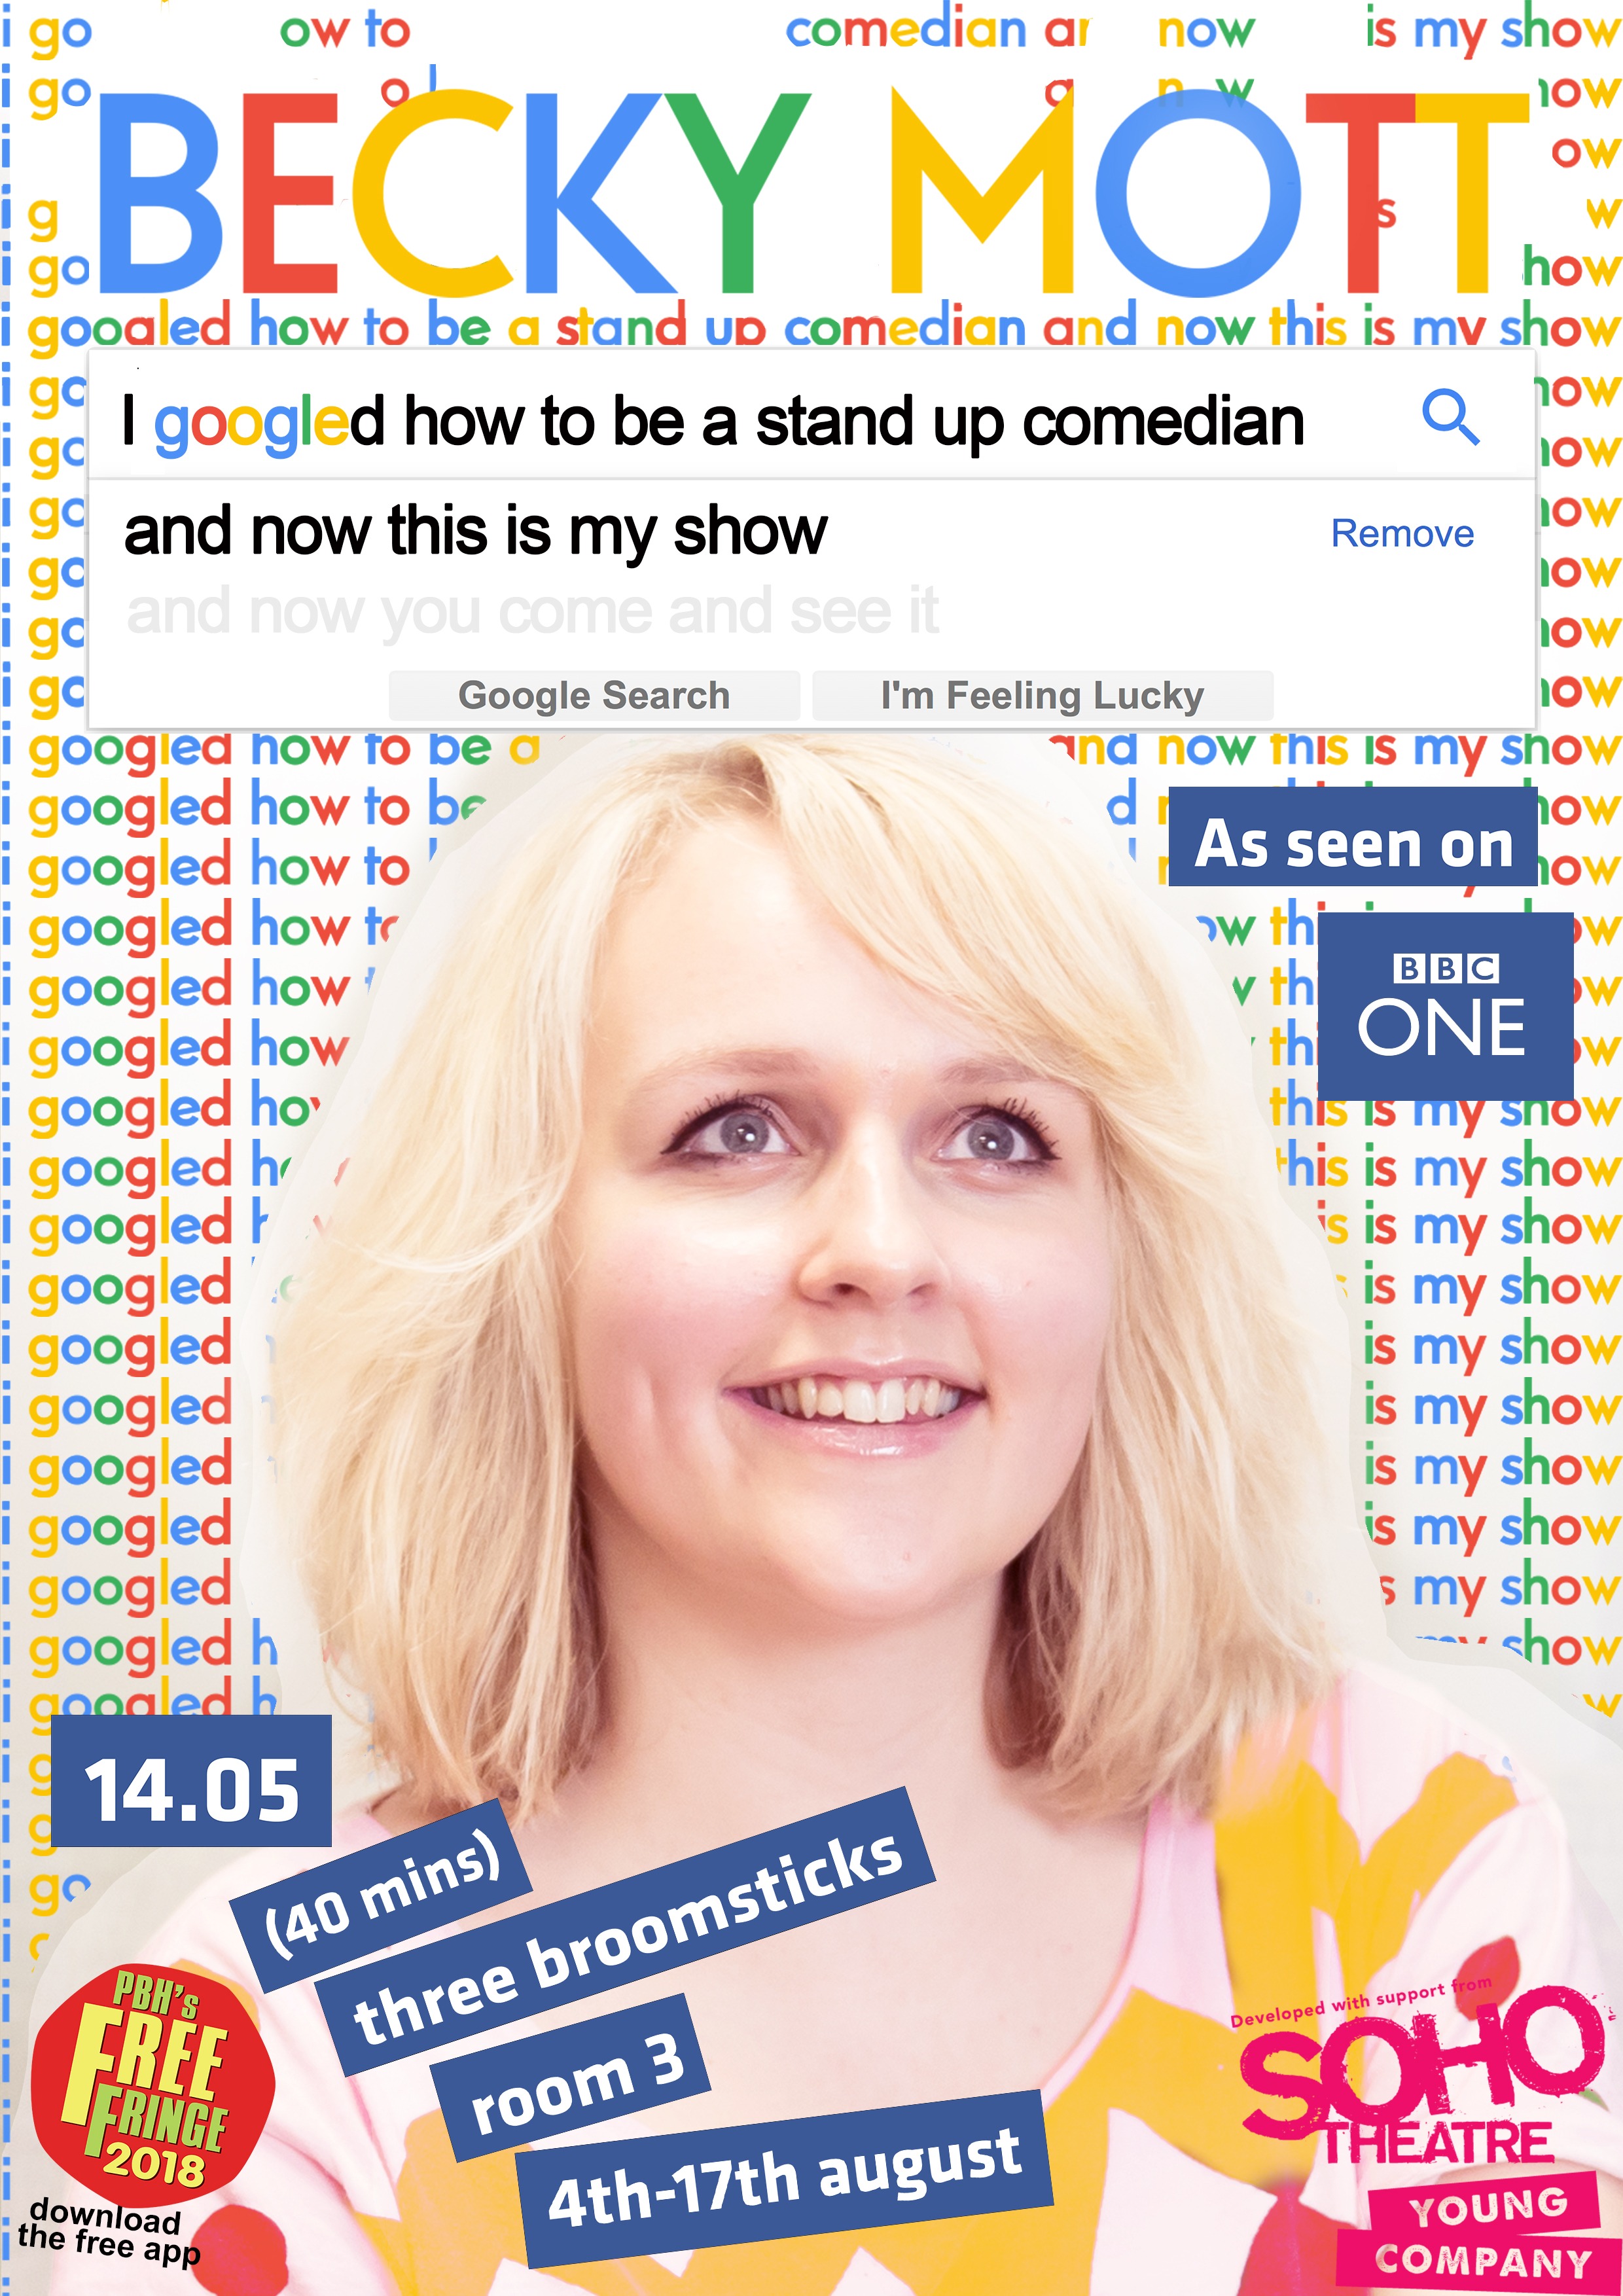 The poster for Becky Mott: I googled how to be a stand up comedian and now this is my show